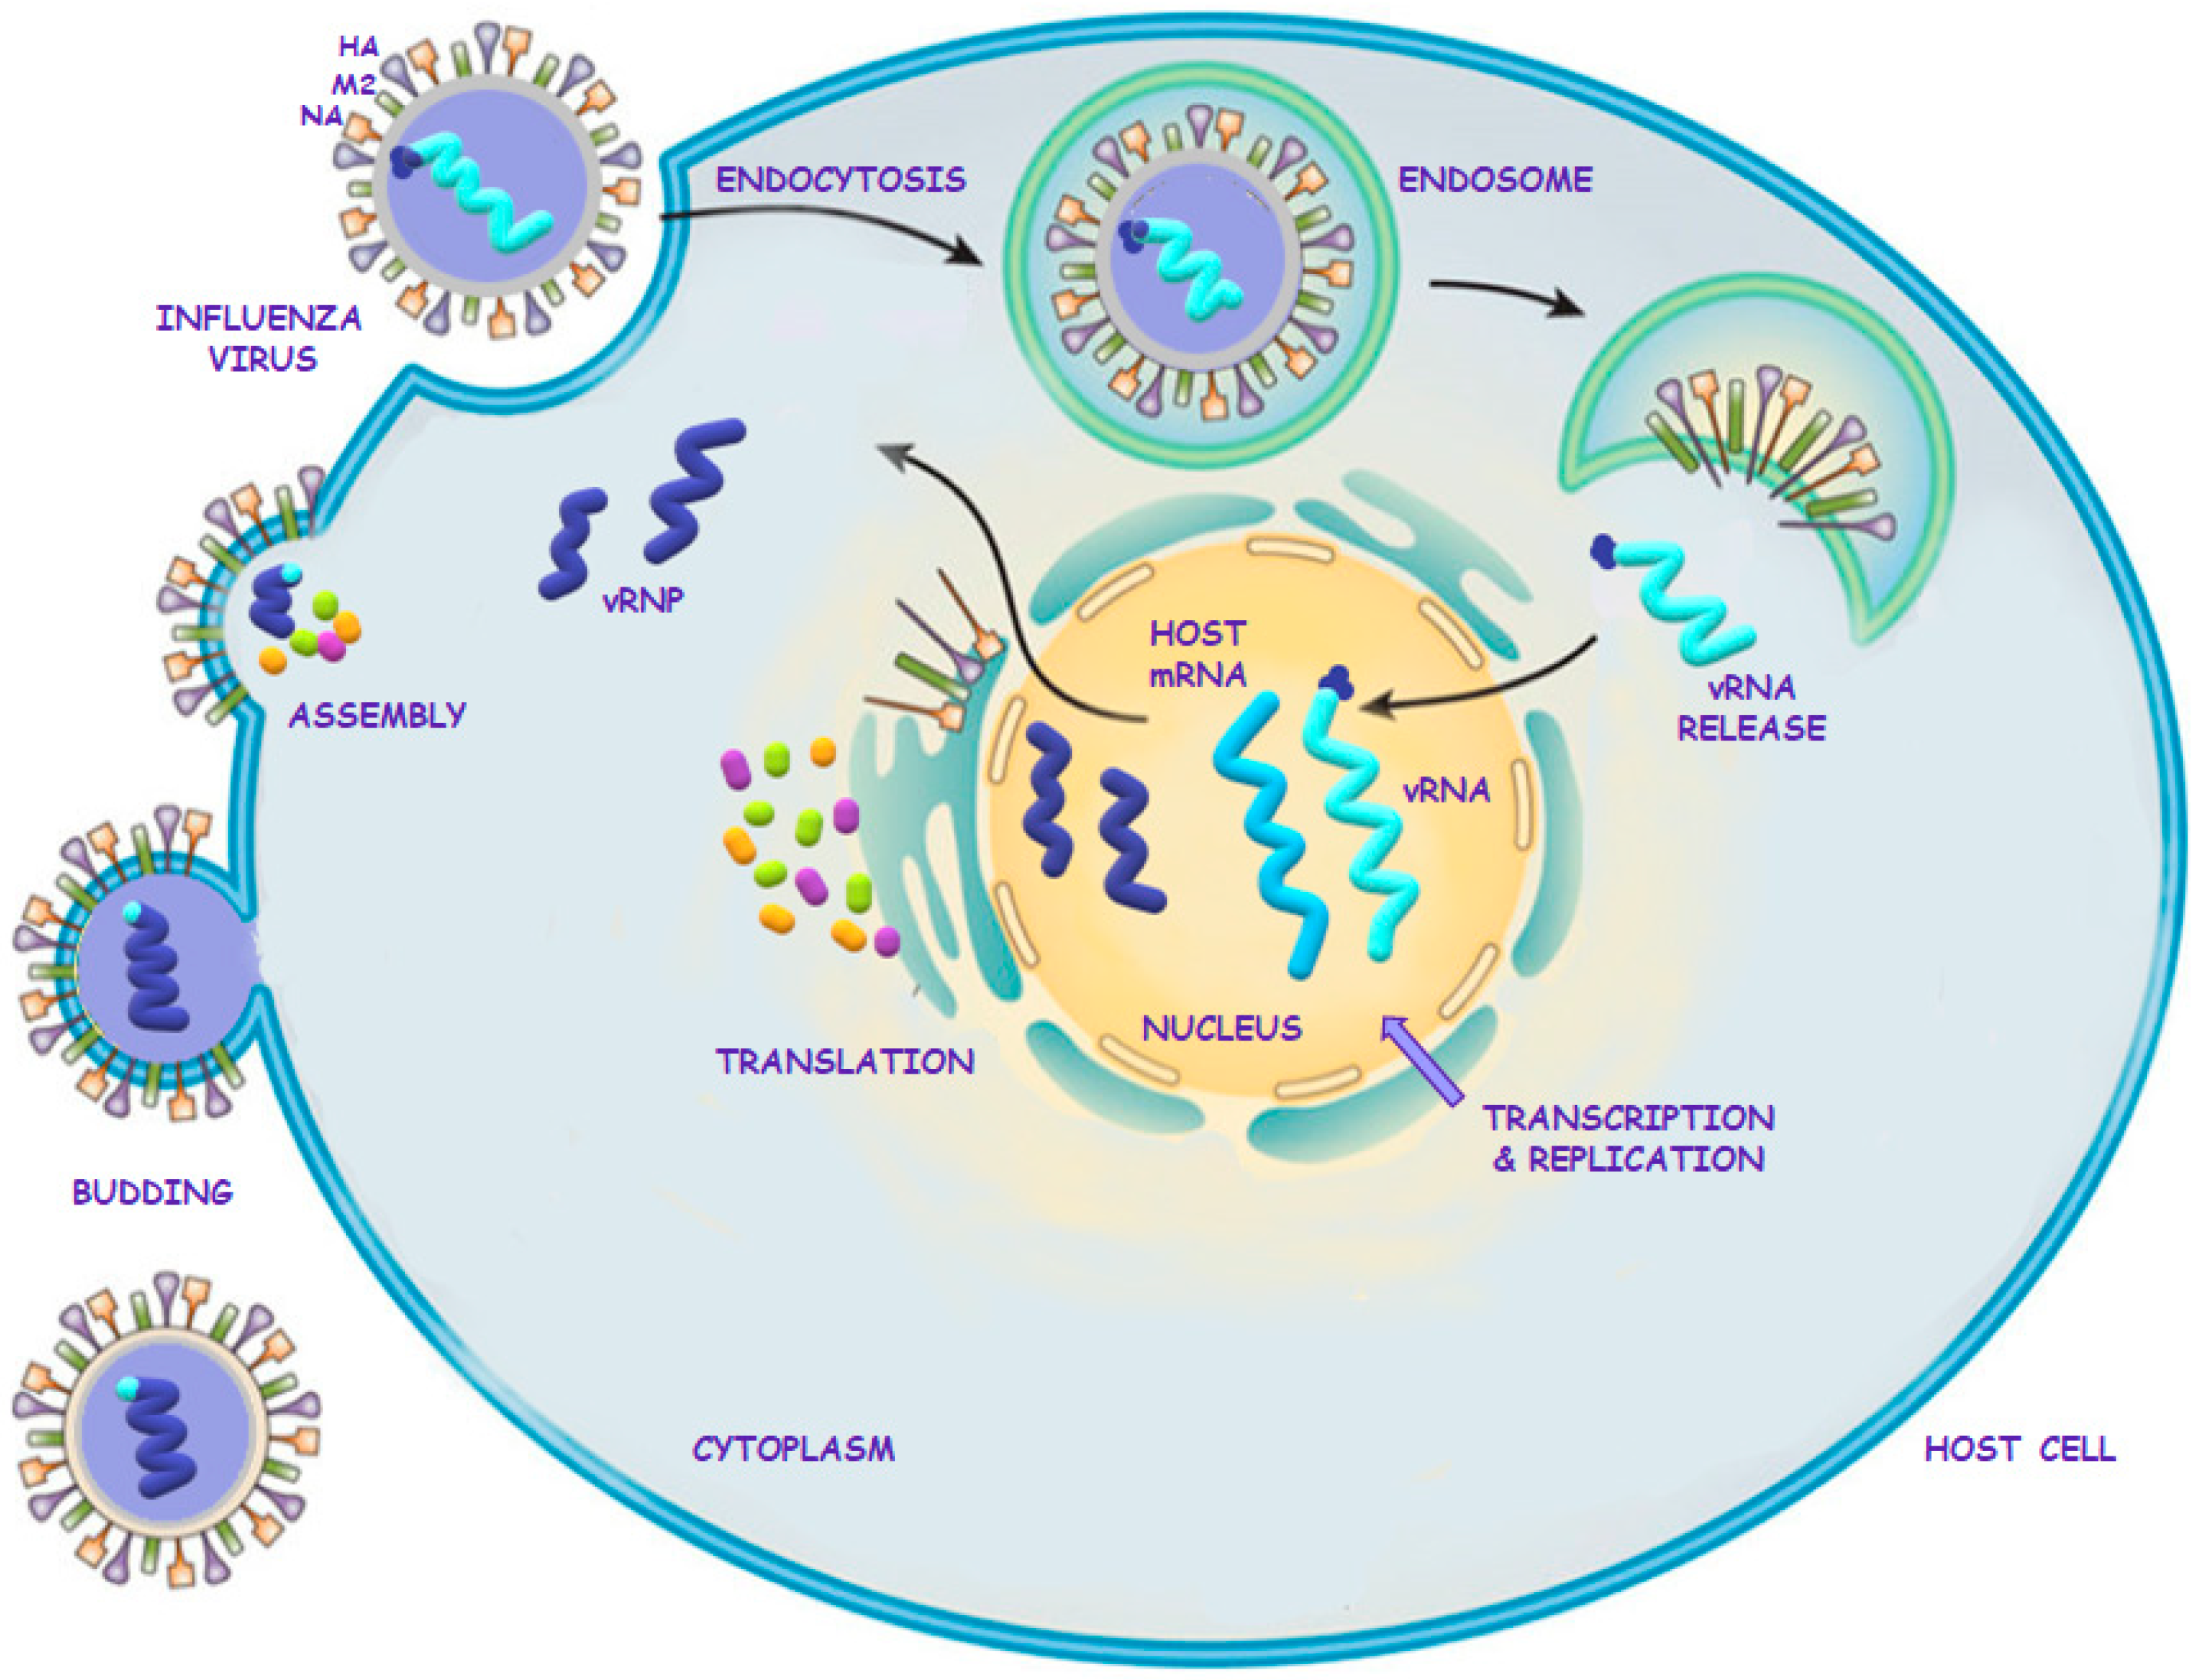 Life cycle of influenza A virus.